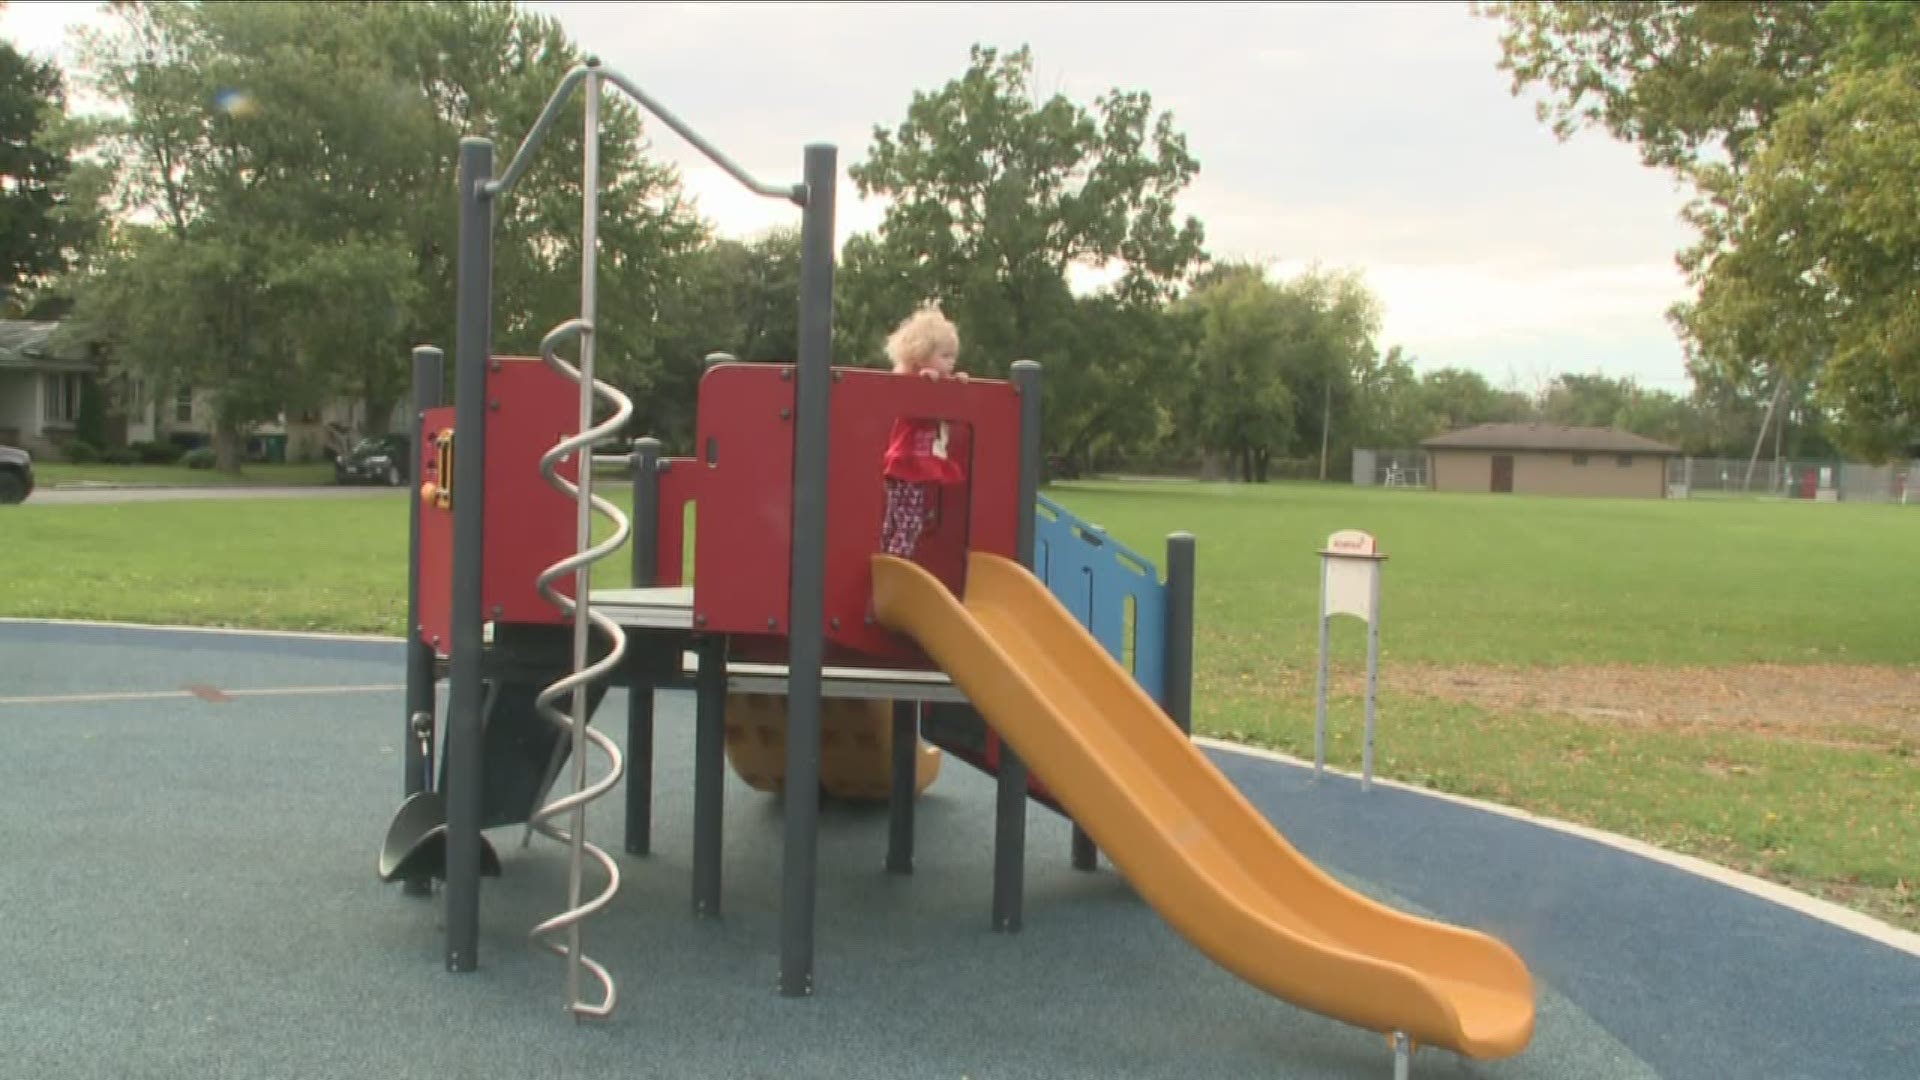 TWO NEW PLAYGROUNDS OPEN IN NIAGARA FALLS